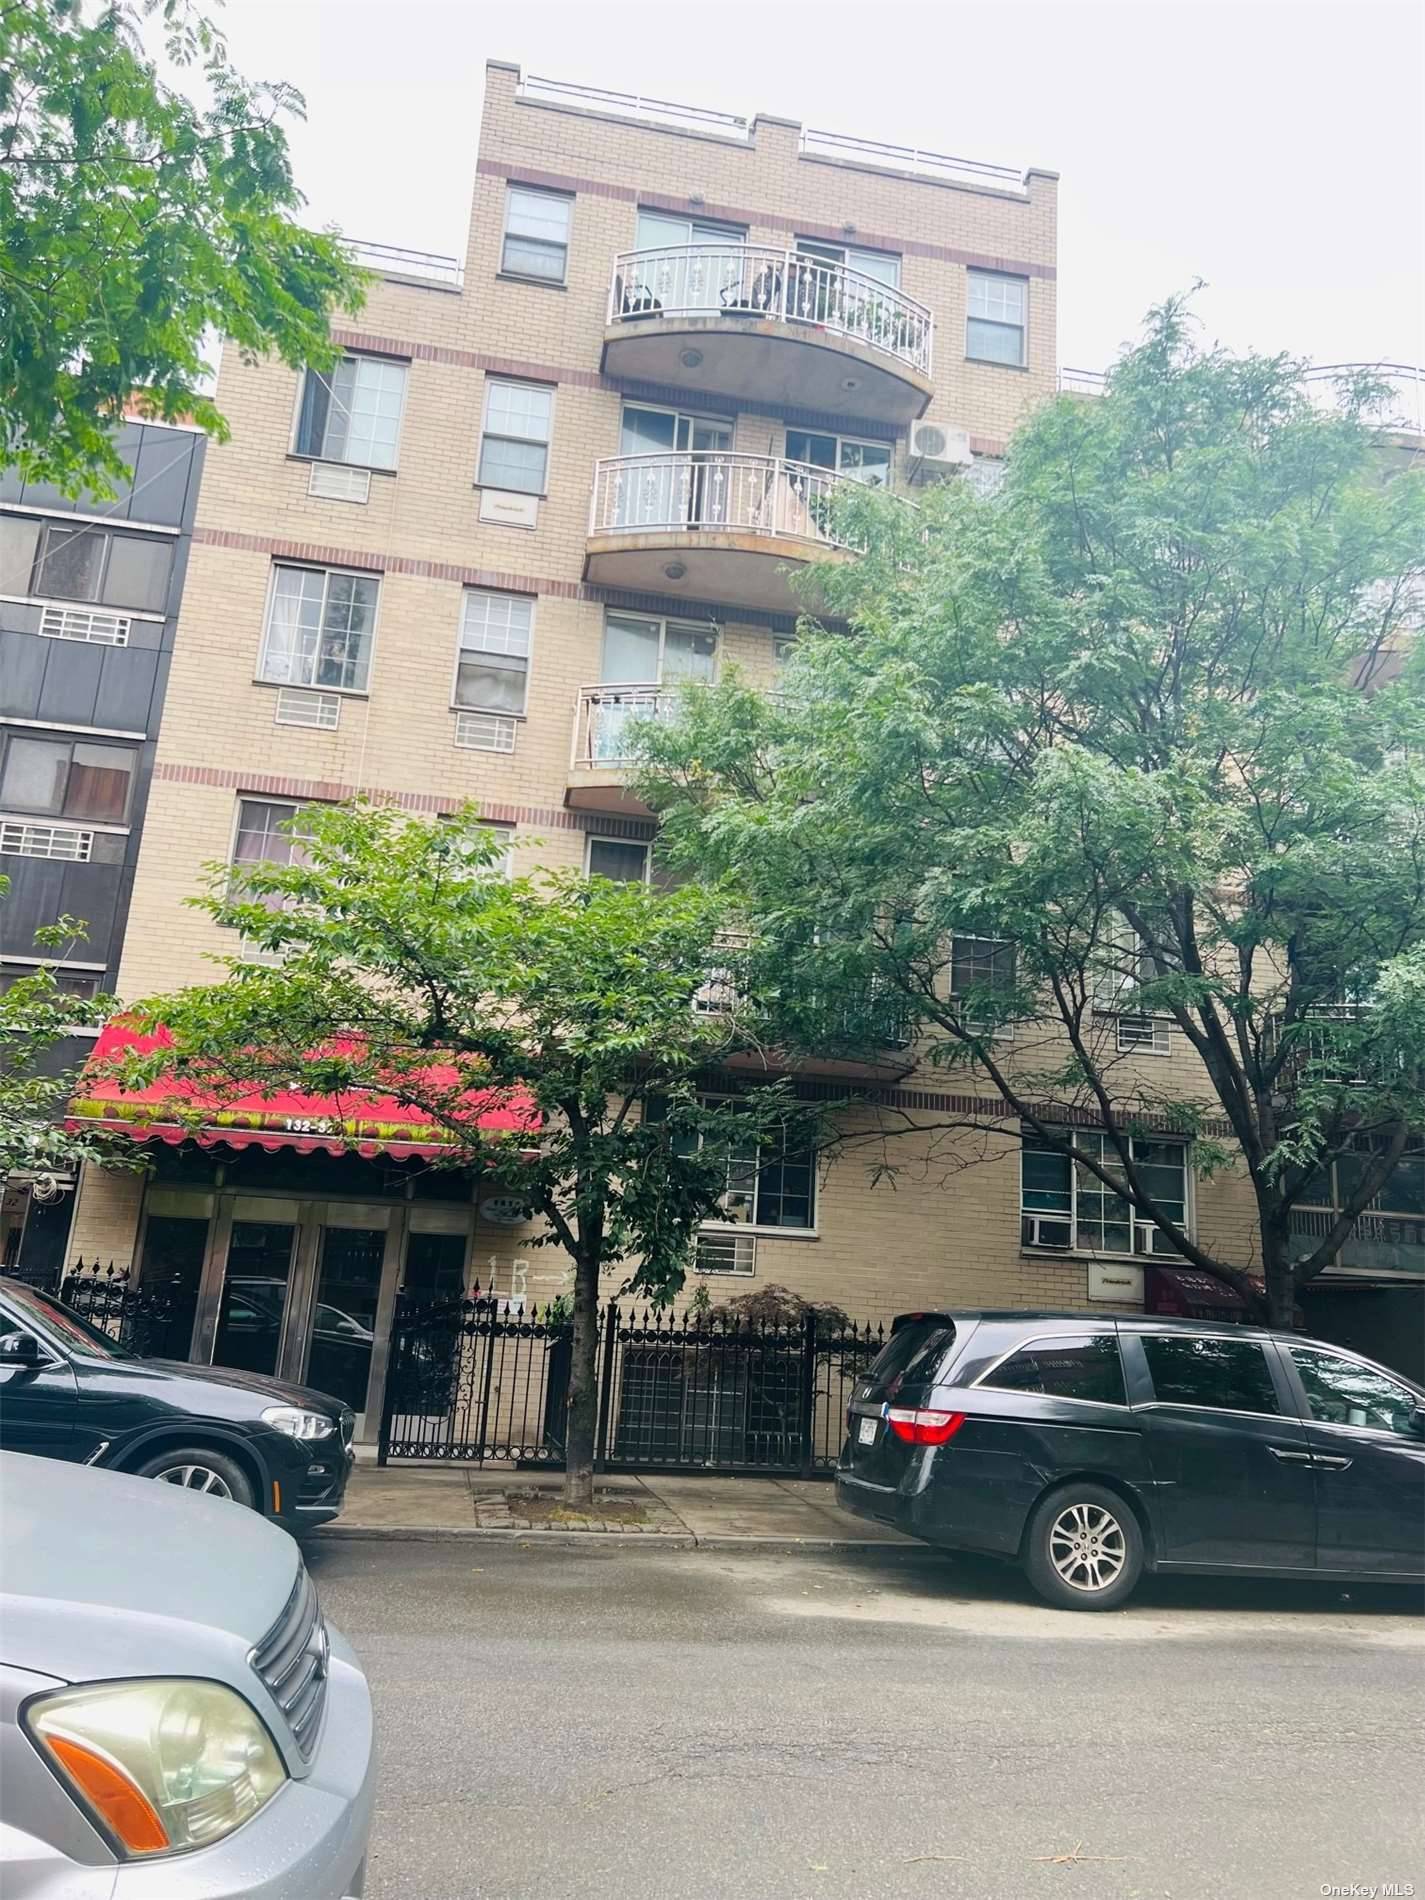 Heart of Flushing, 3BRs, 2 baths, 2 balcony duplex condo apartment with parking spot for sale.